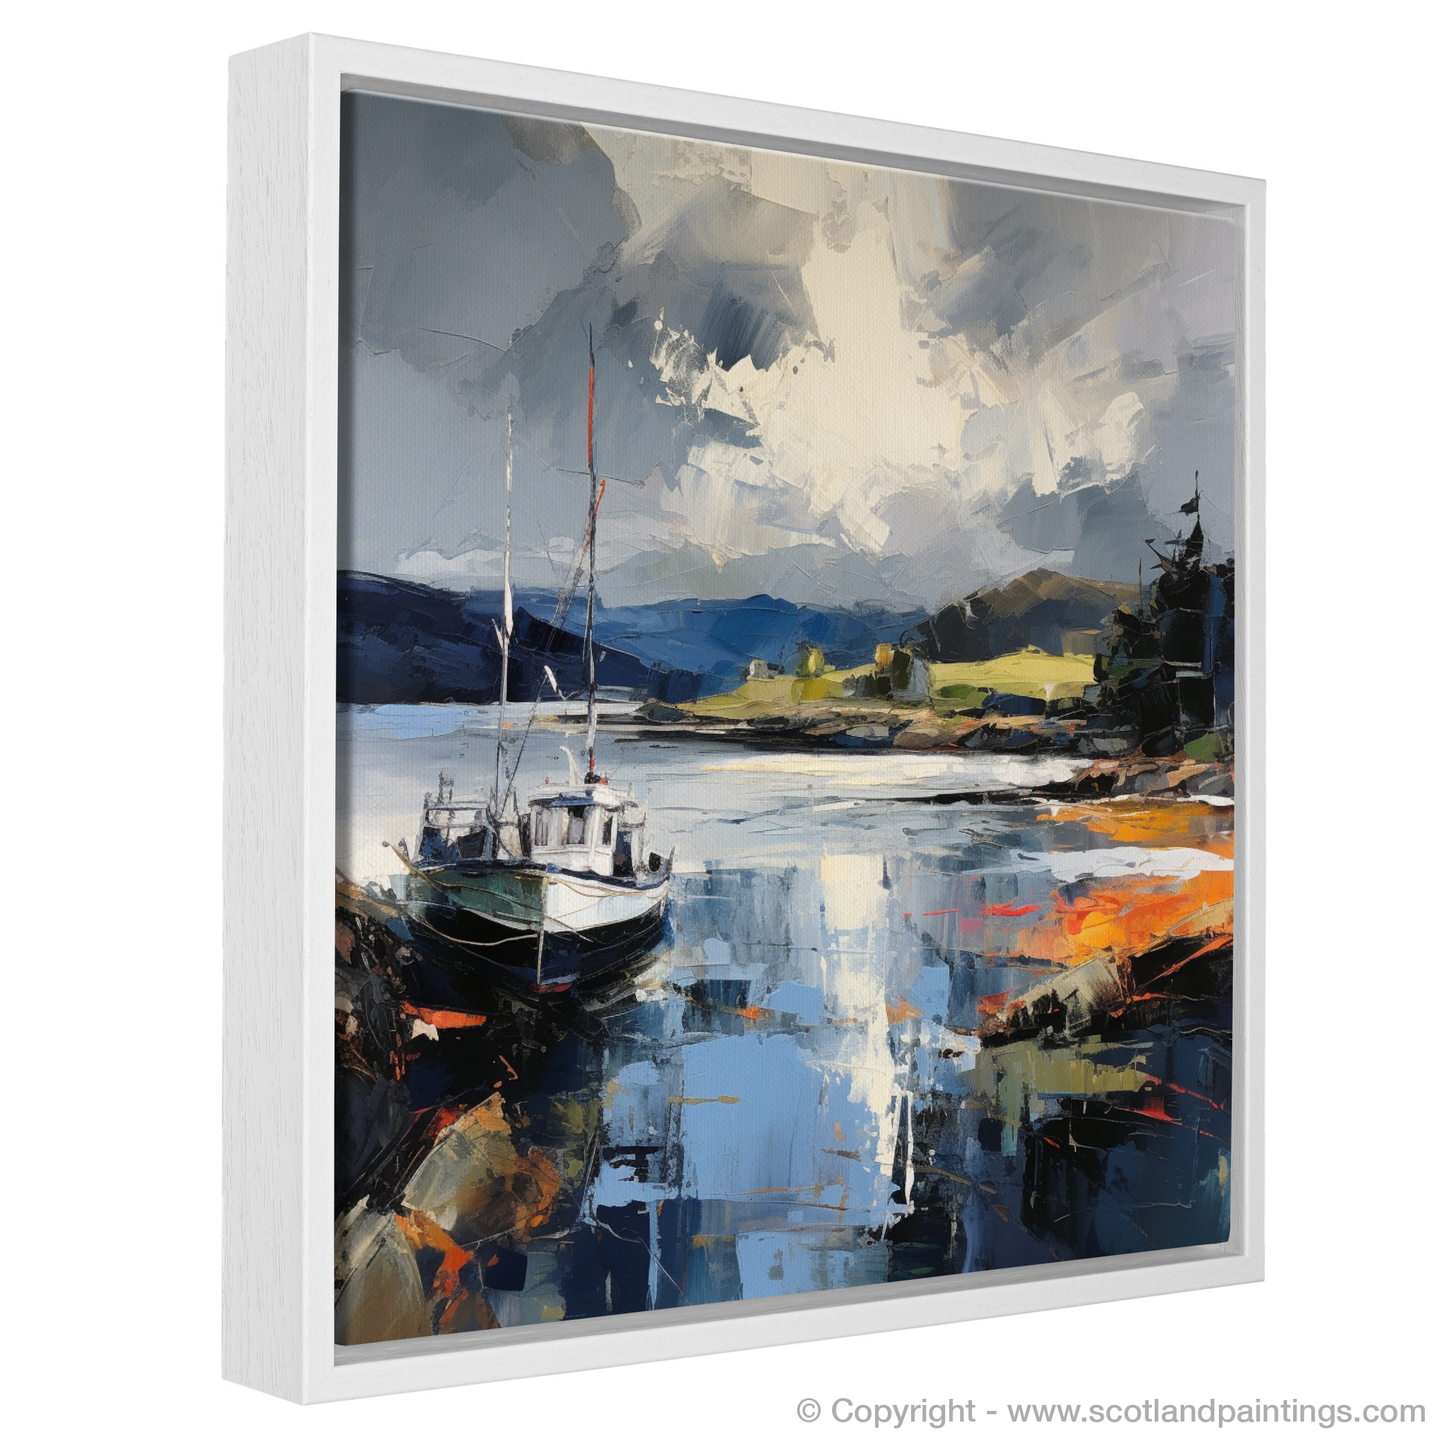 Painting and Art Print of Tayvallich Harbour with a stormy sky entitled "Storm Over Tayvallich Harbour: An Expressionist Tribute".